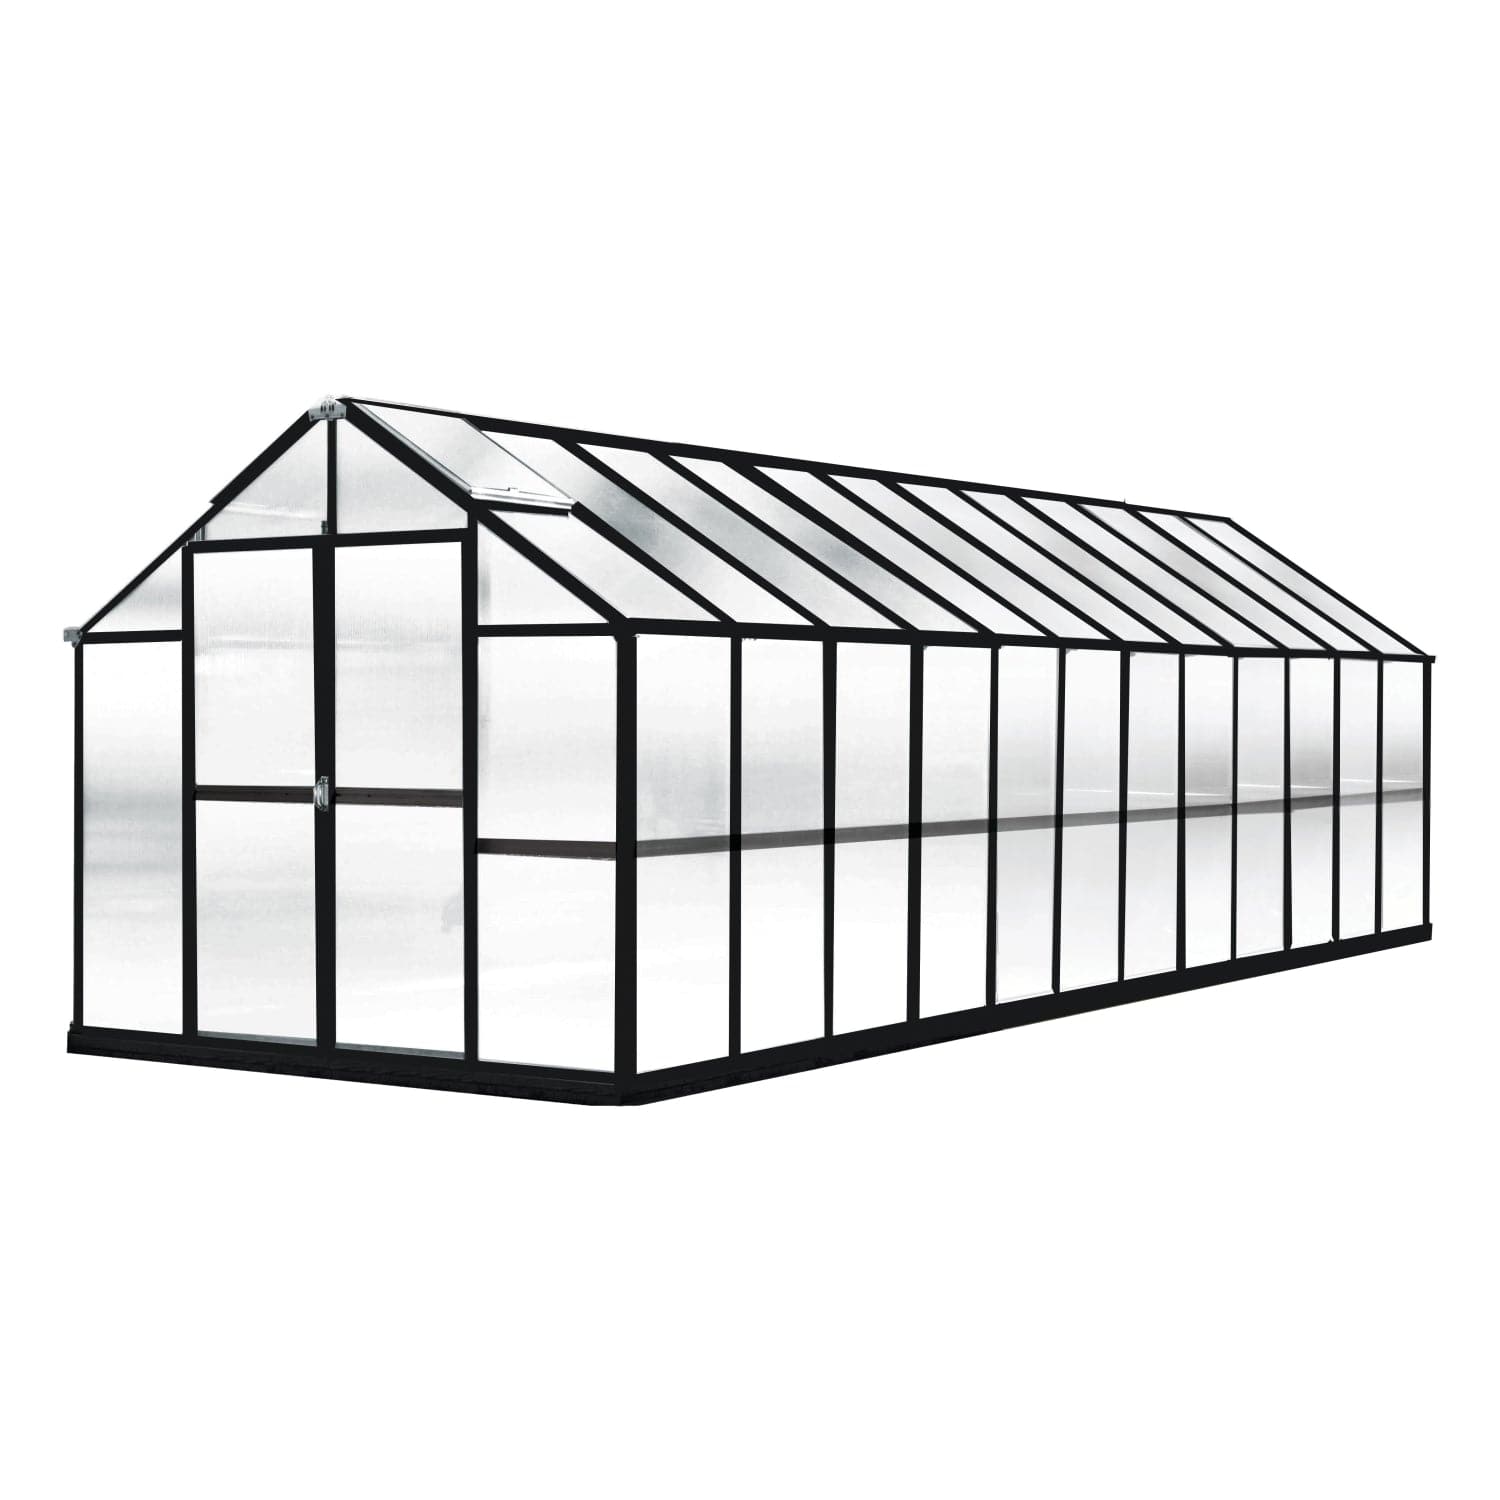 Riverstone Industries Deluxe Greenhouse Kit 24' x 8' x 7'6" Riverstone | MONT Growers Edition Greenhouse - Black Finish MONT-24-BK-GROWERS